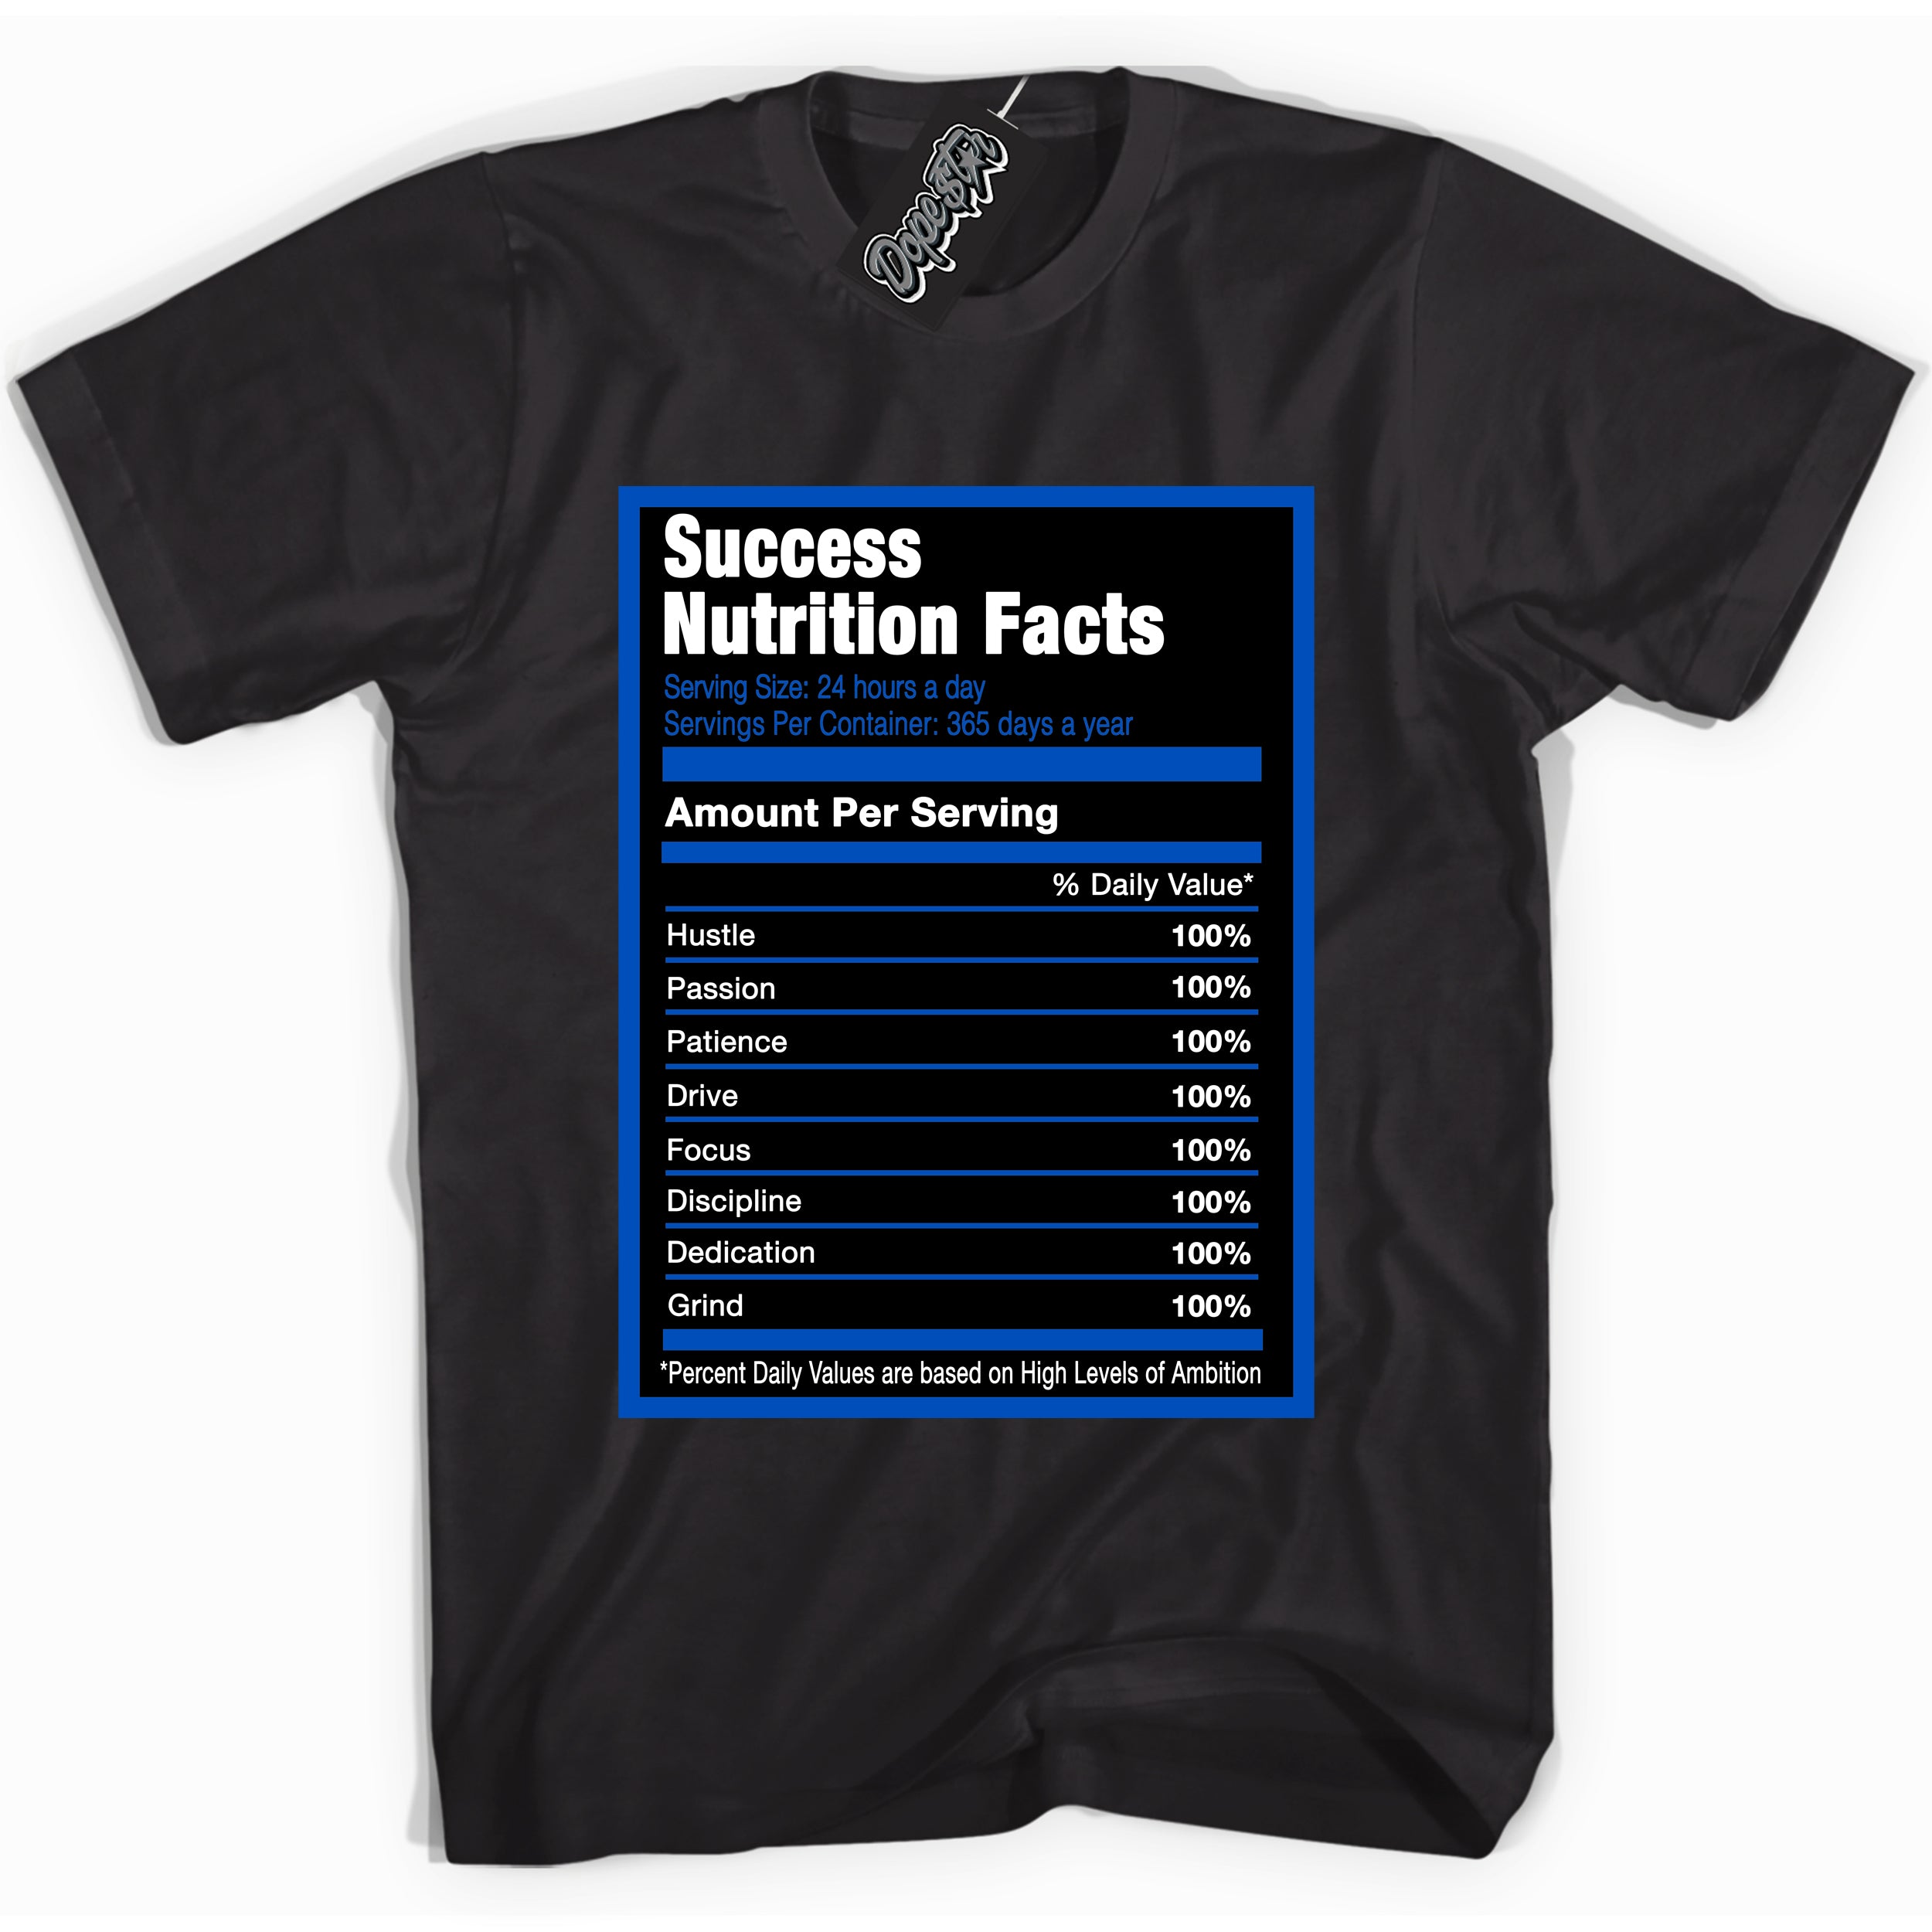 Cool Black graphic tee with Success Nutrition print, that perfectly matches OG Royal Reimagined 1s sneakers 